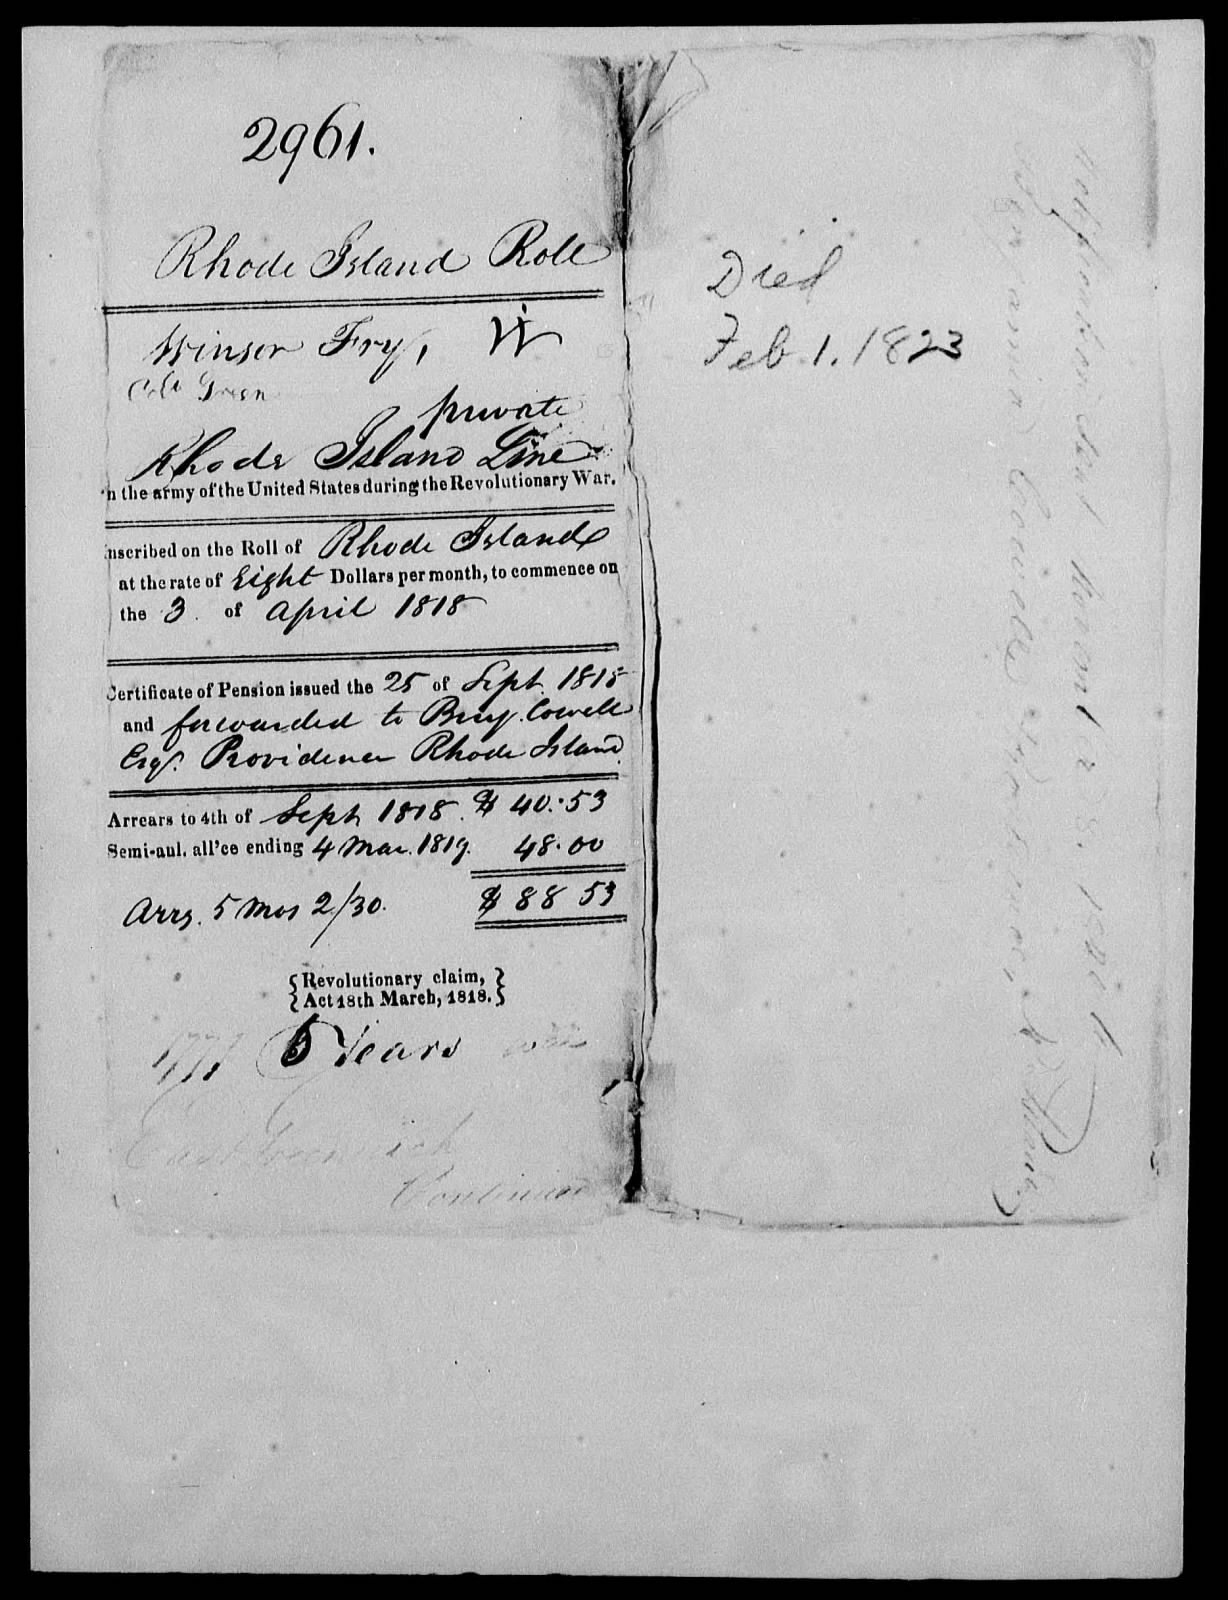 Pension Application Record, Winsor Fry, 1818